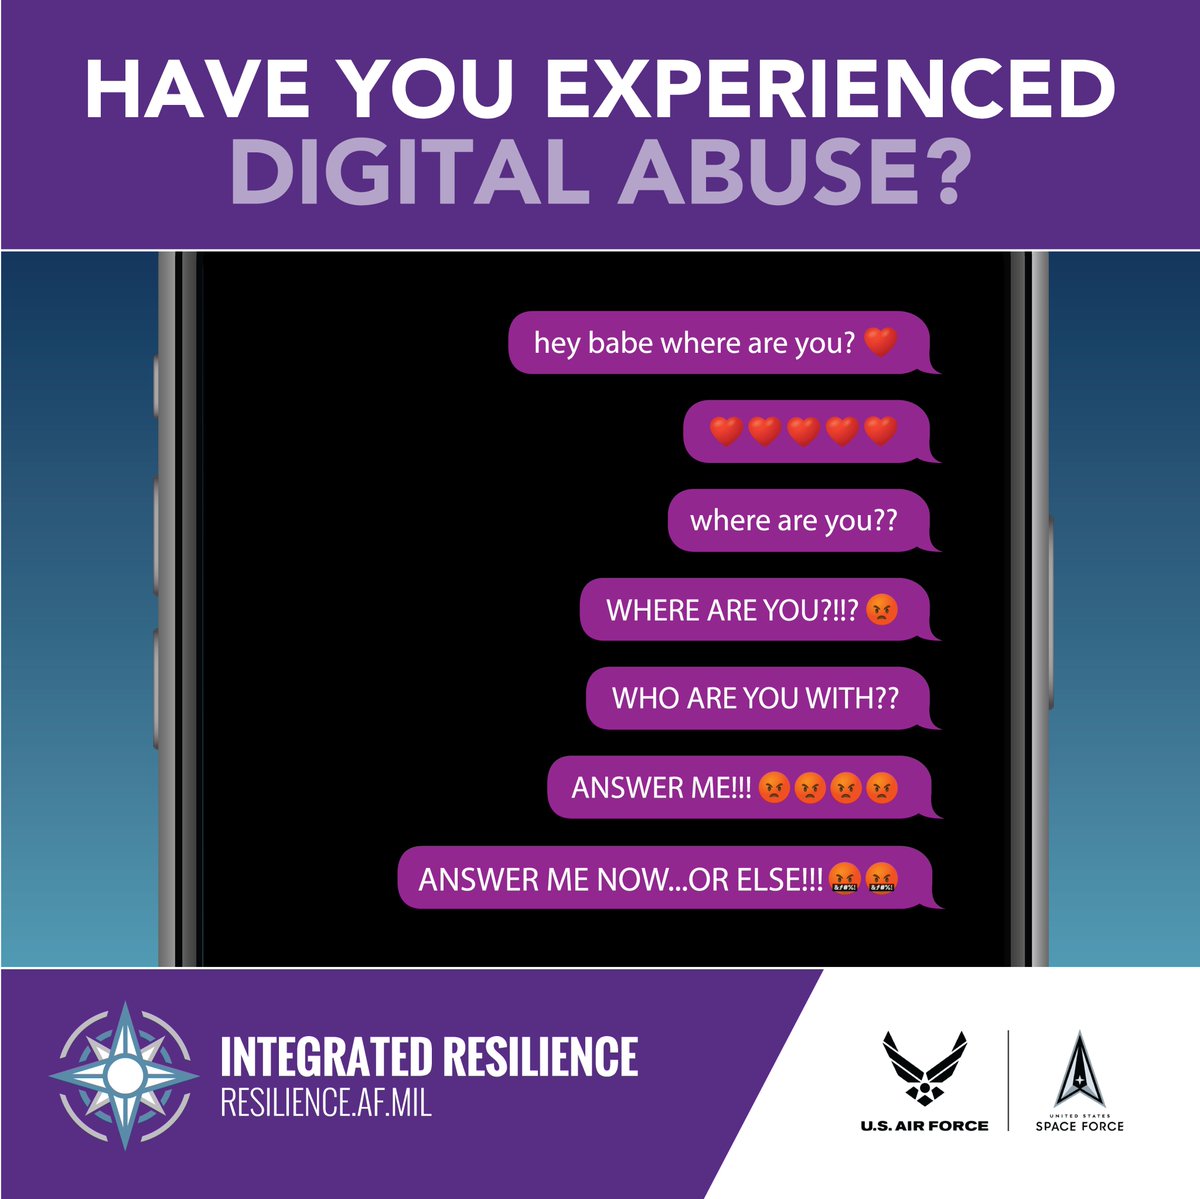 Does your partner use technology to keep tabs on you? Perhaps even to harass or intimidate you? That’s called #DigitalAbuse. Learn how to document it.
militaryonesource.mil/preventing-vio…